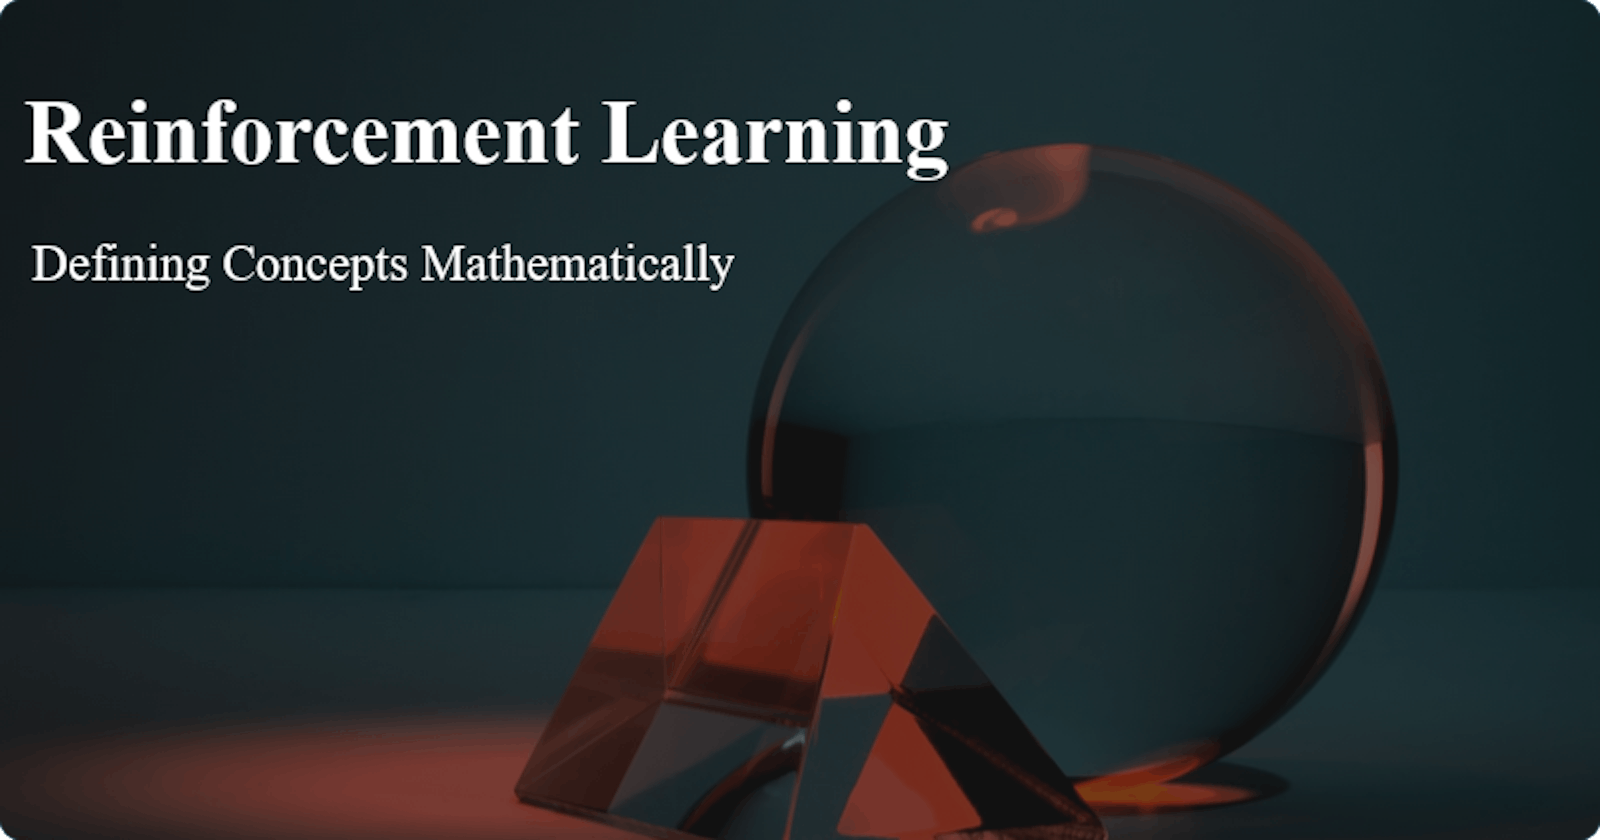 Reinforcement Learning: Defining Concepts Mathematically